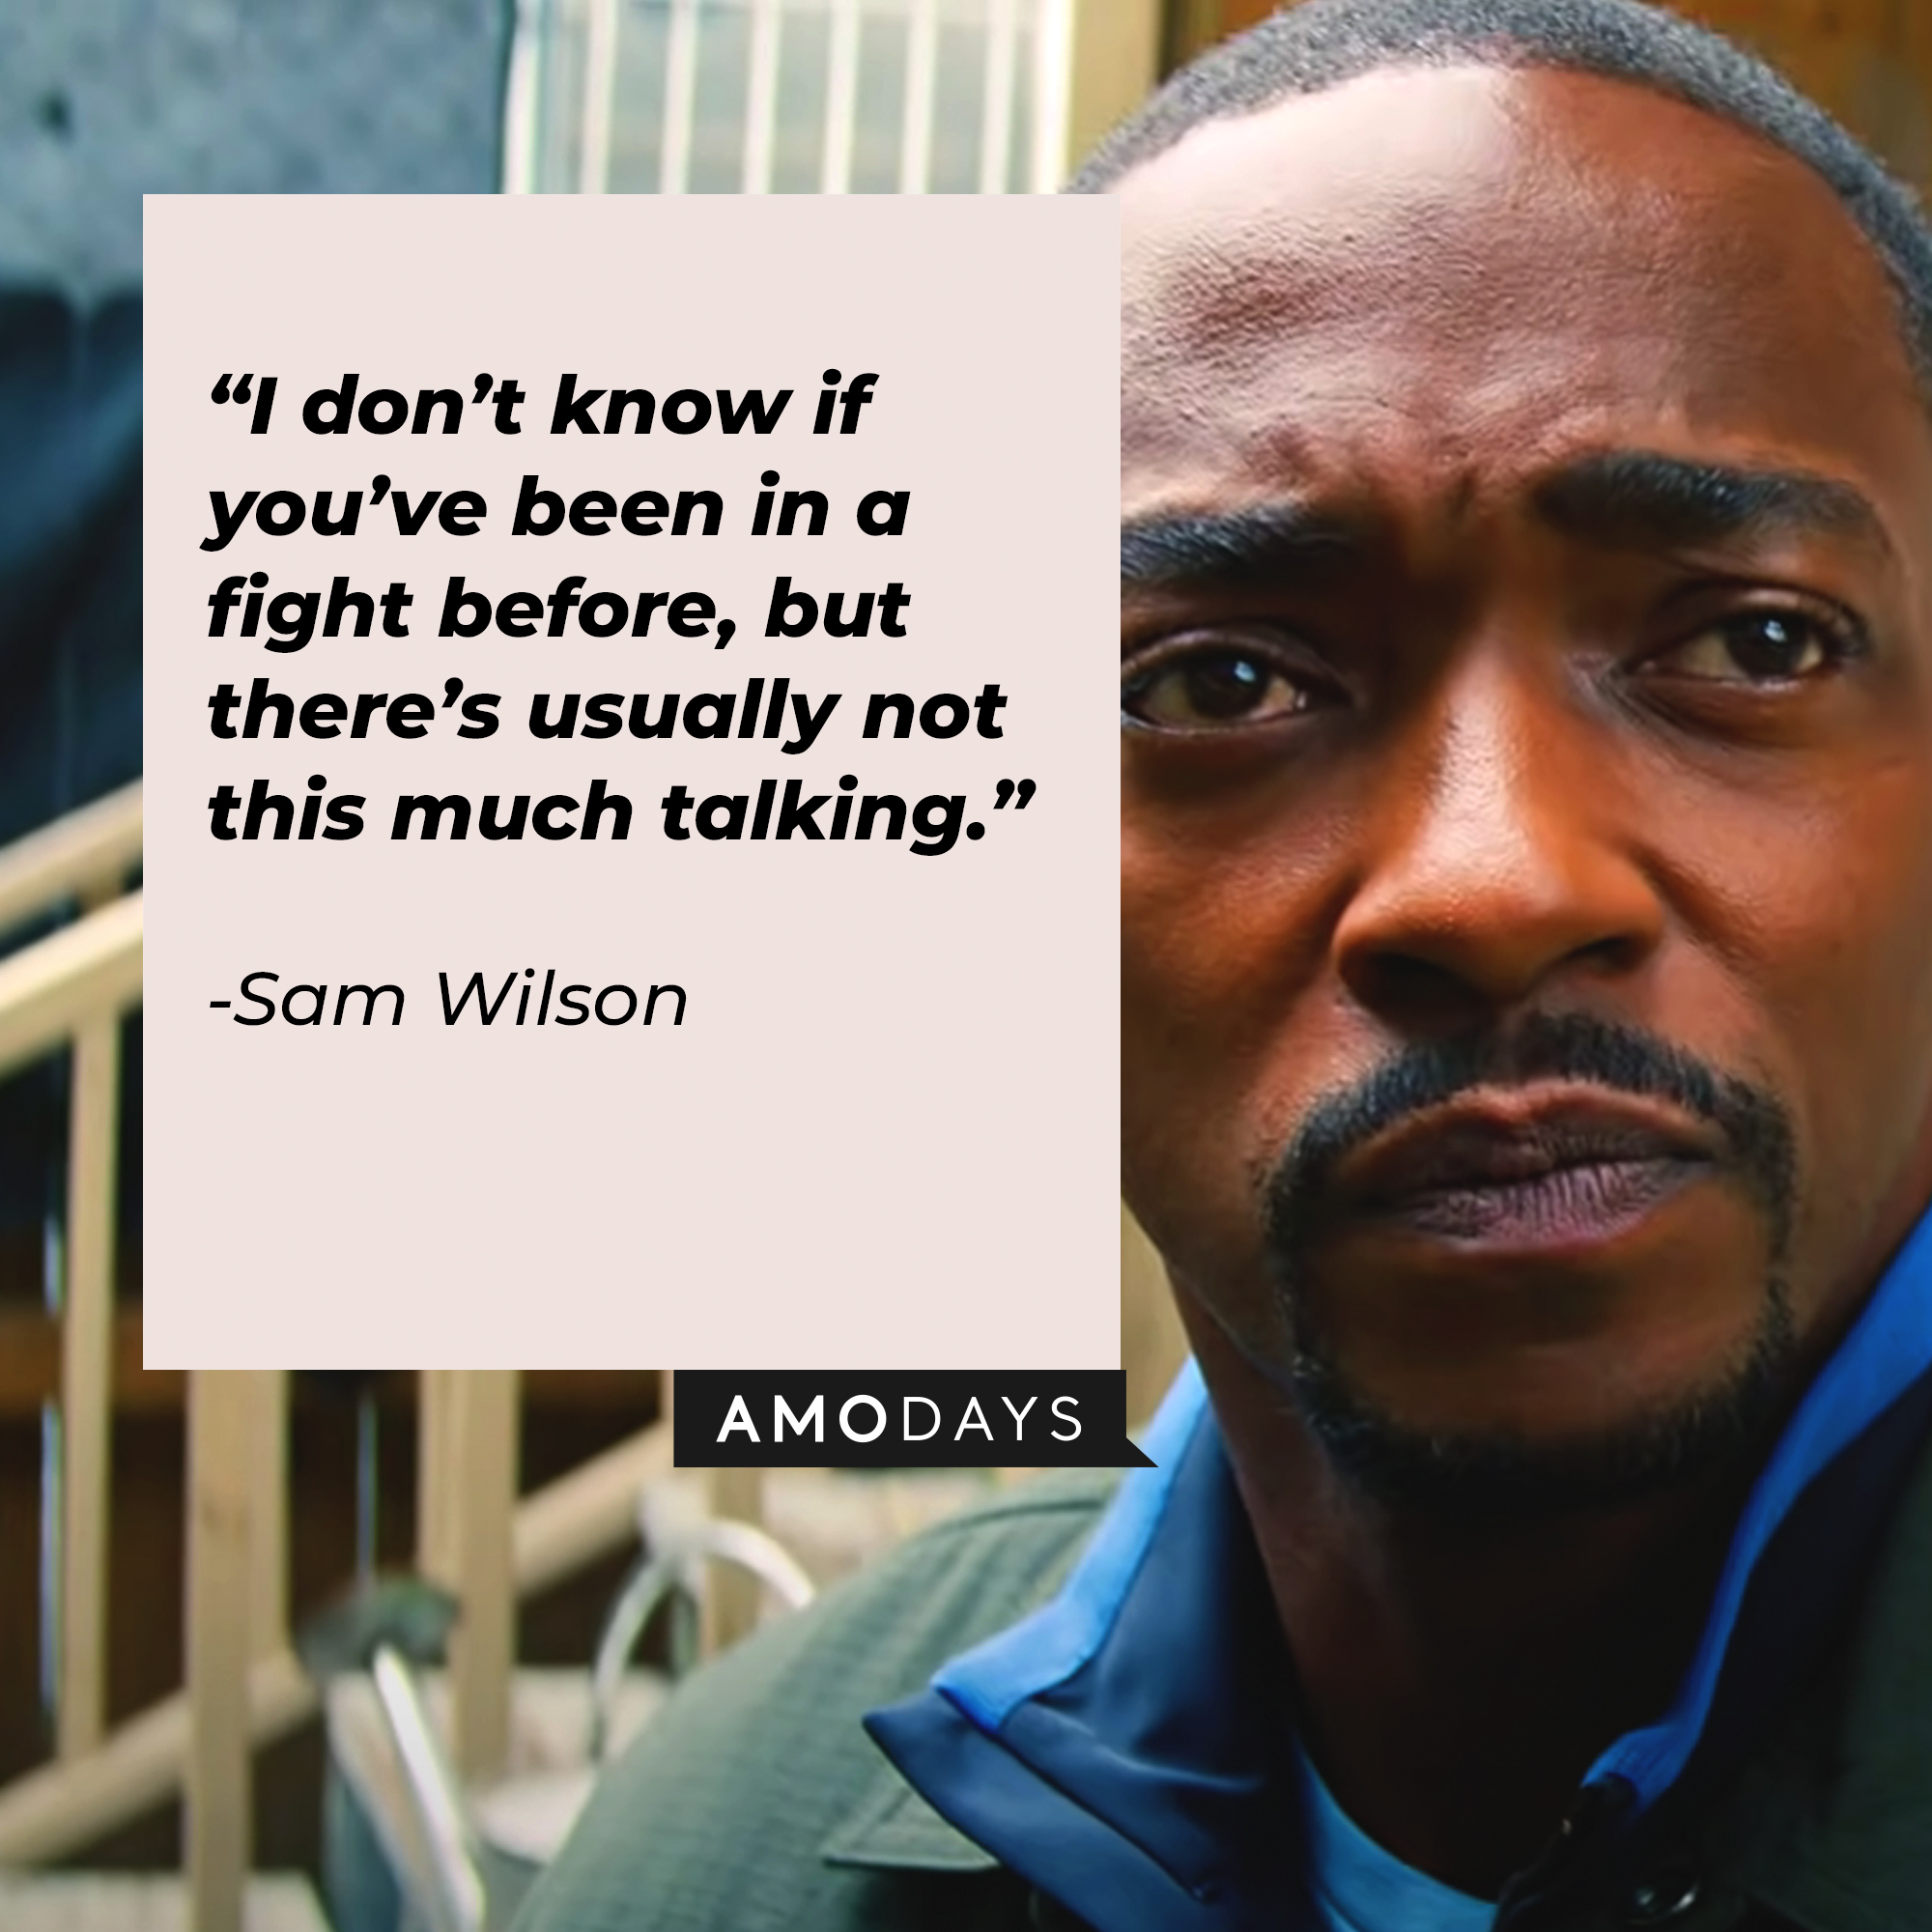 Sam Wilson, with his quote: "I don’t know if you’ve been in a fight before but there’s usually not this much talking." | Source: Youtube.com/marvel